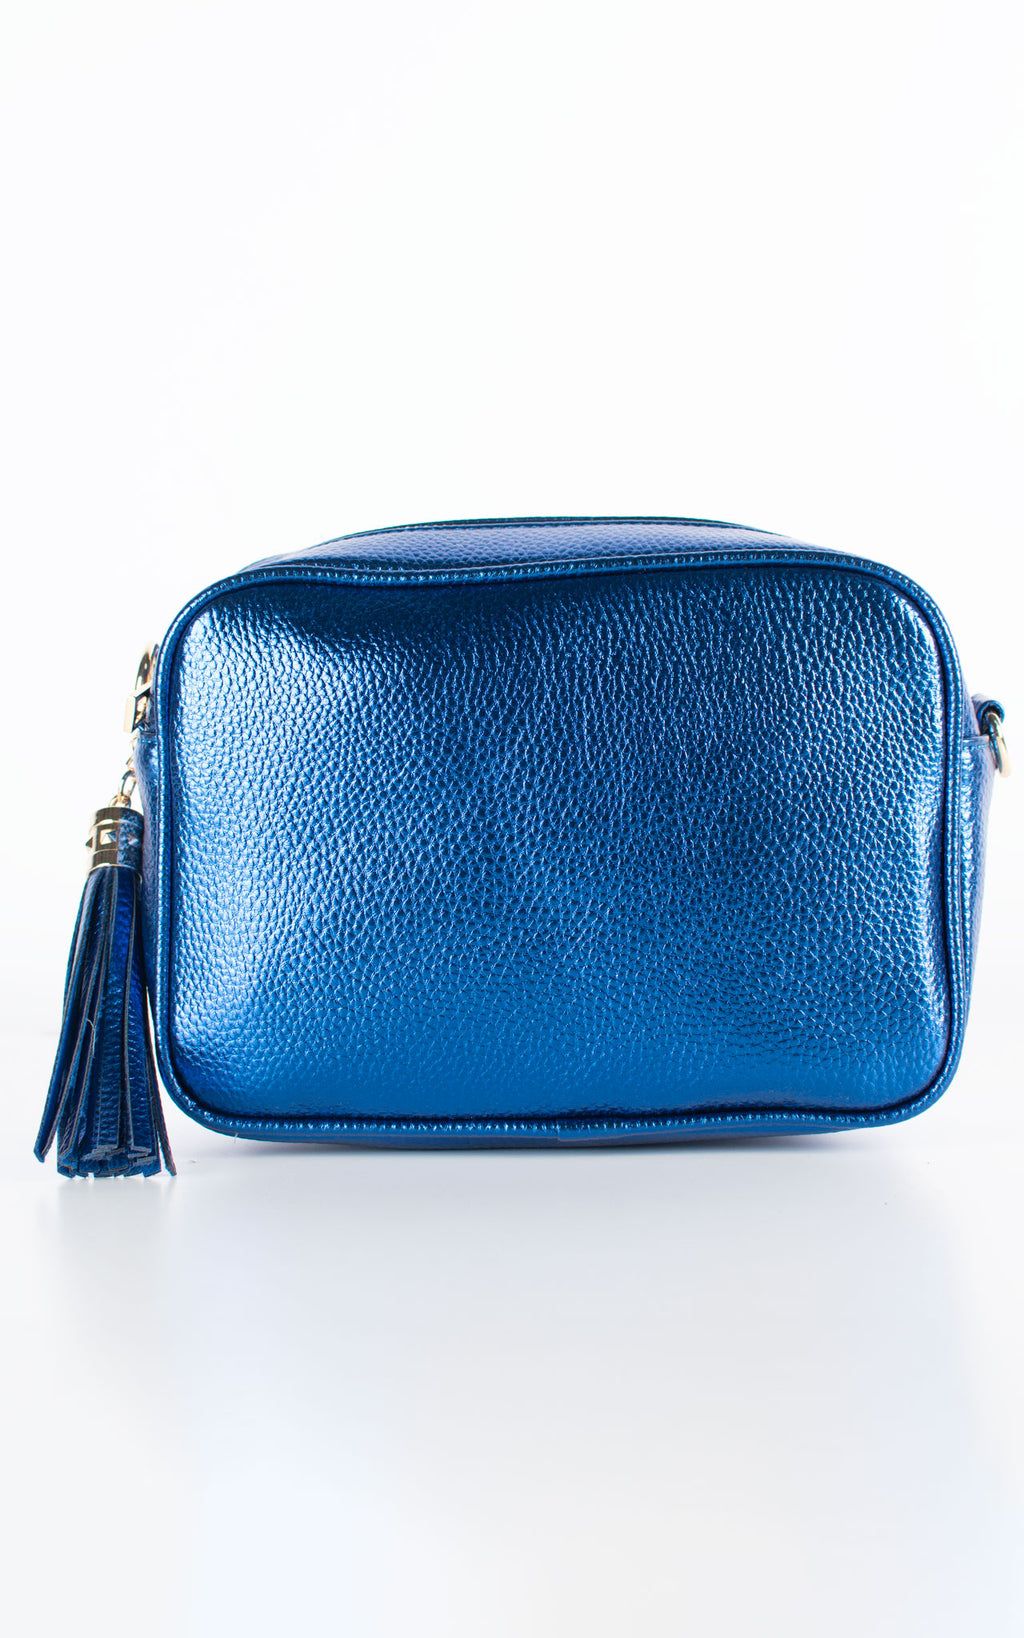 New Proportion Electric Blue Clutch Purse with Brushed Metal